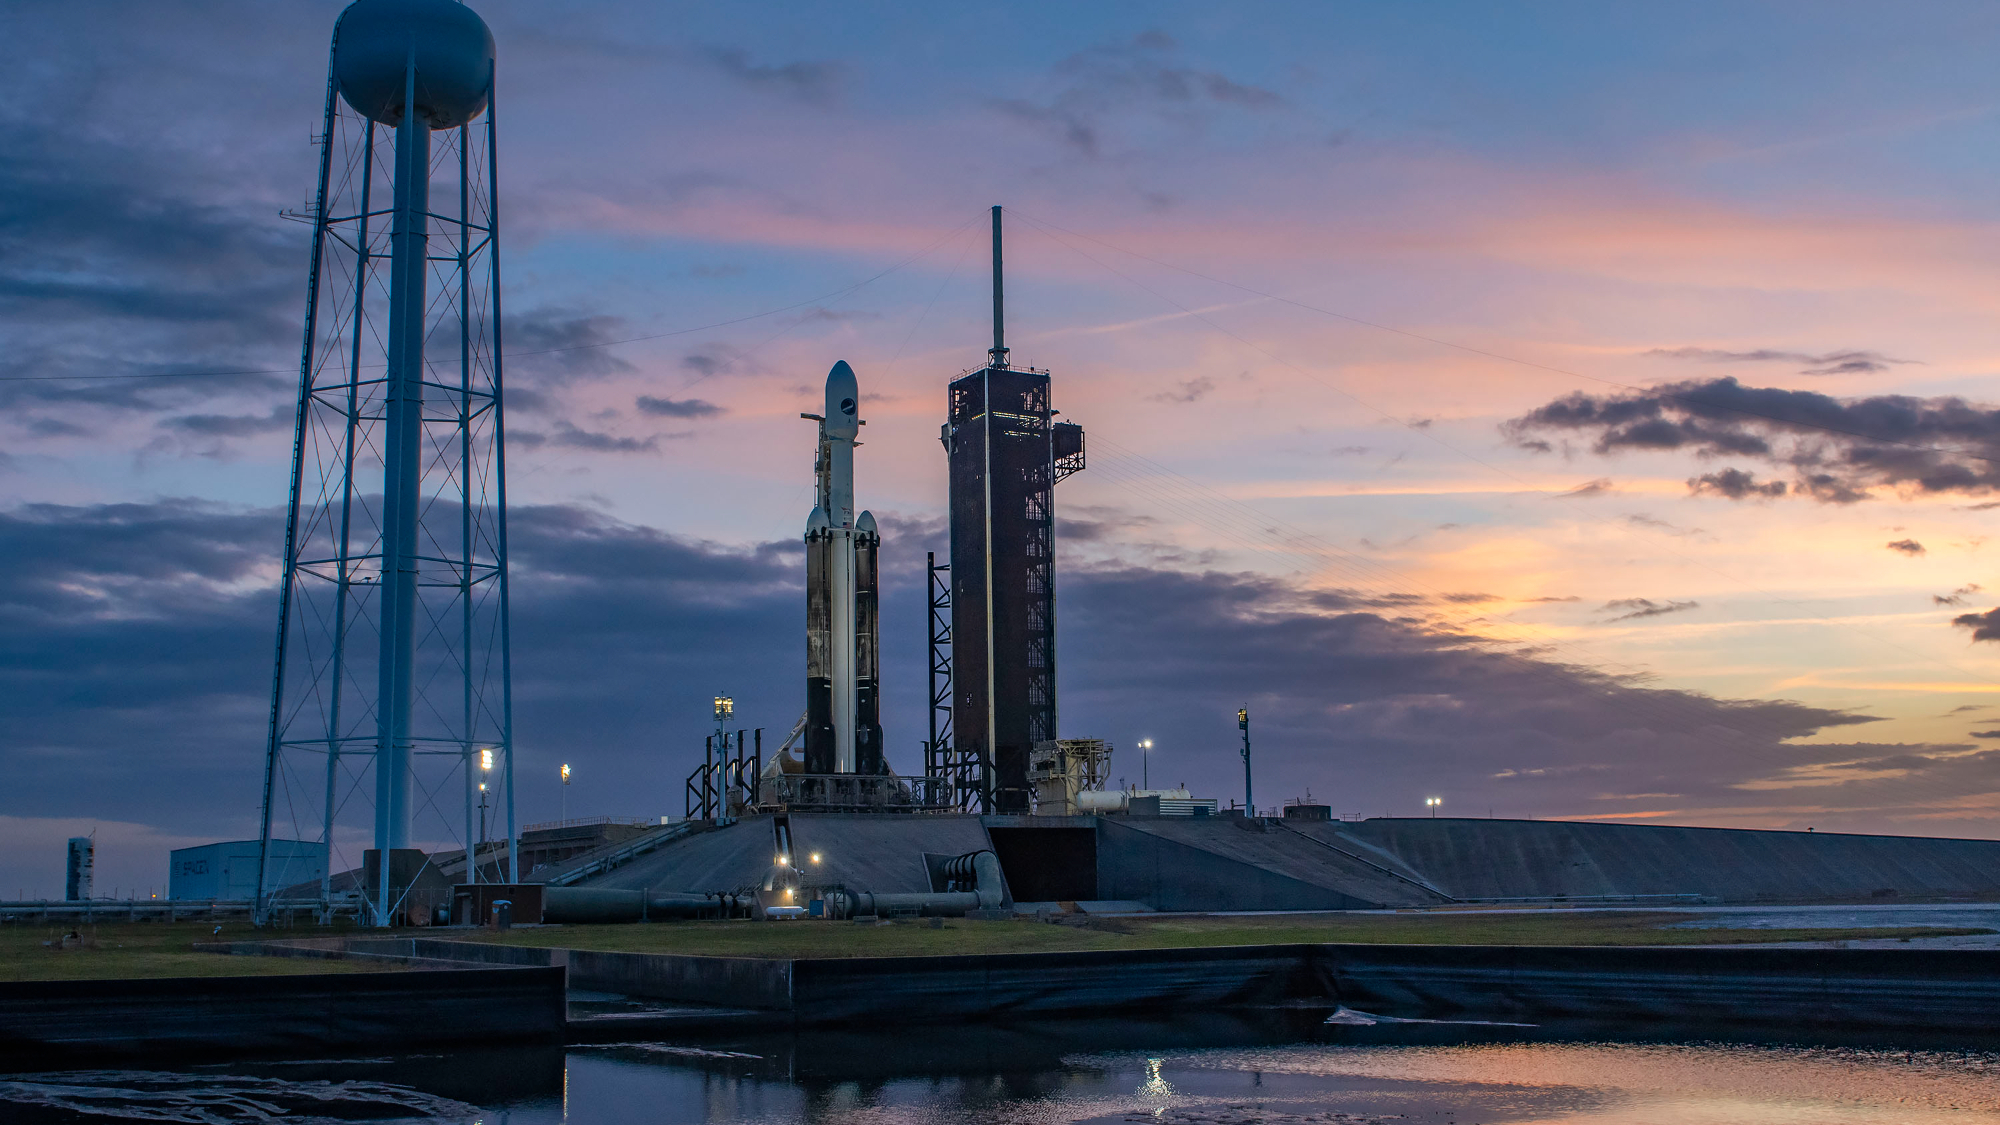 SpaceX scrubs Falcon Heavy’s X-37B space plane launch due to ground issue Space